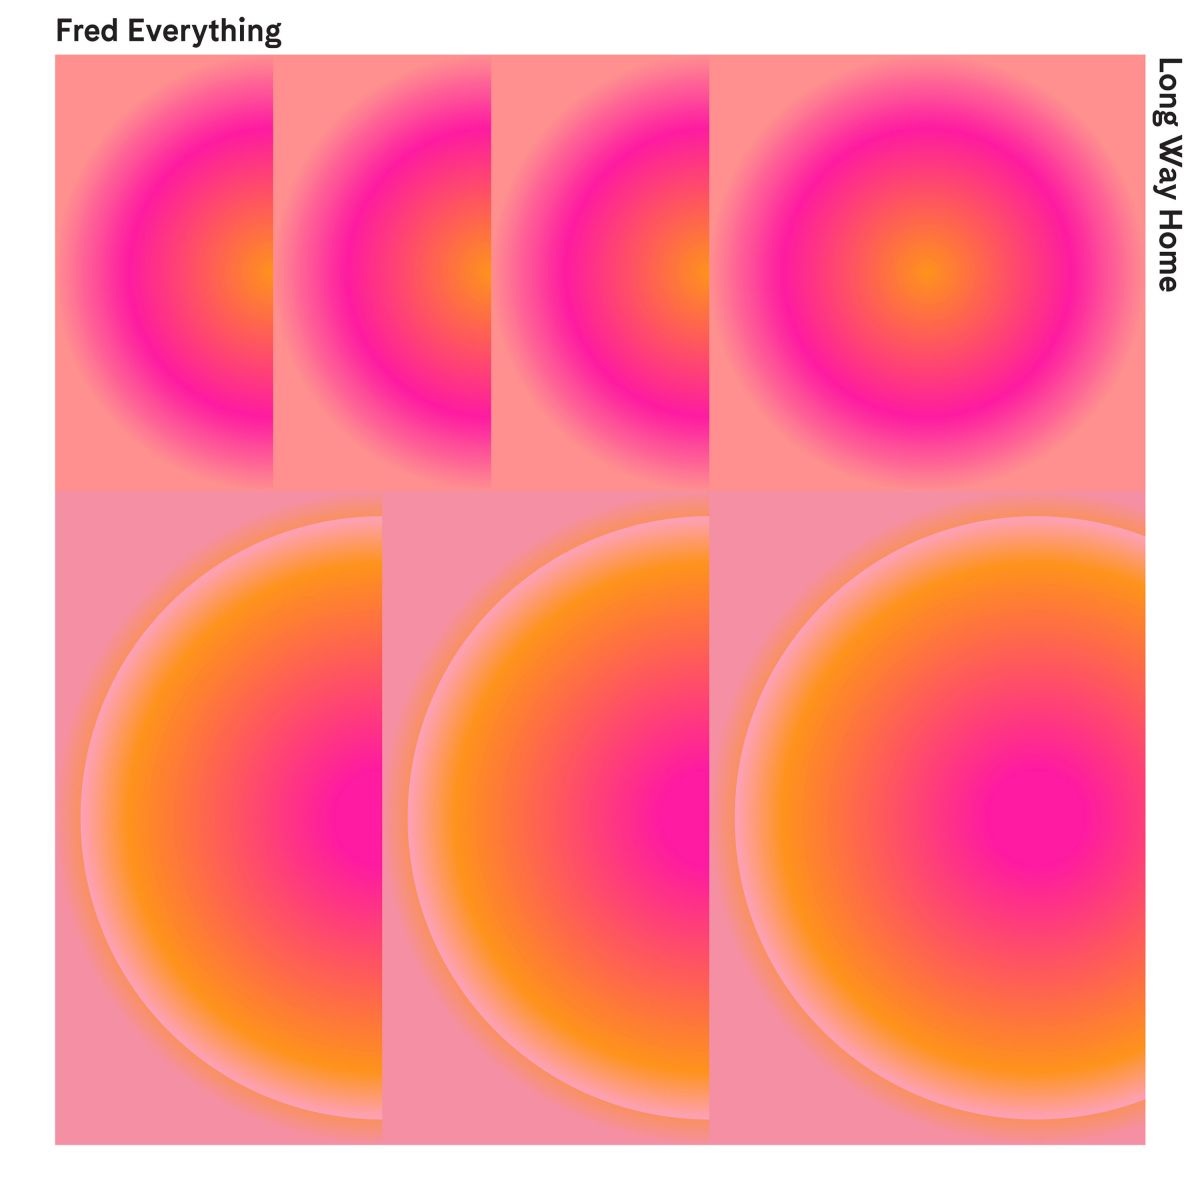 Fred Everything - Long Way Home / Lazy Days Recordings